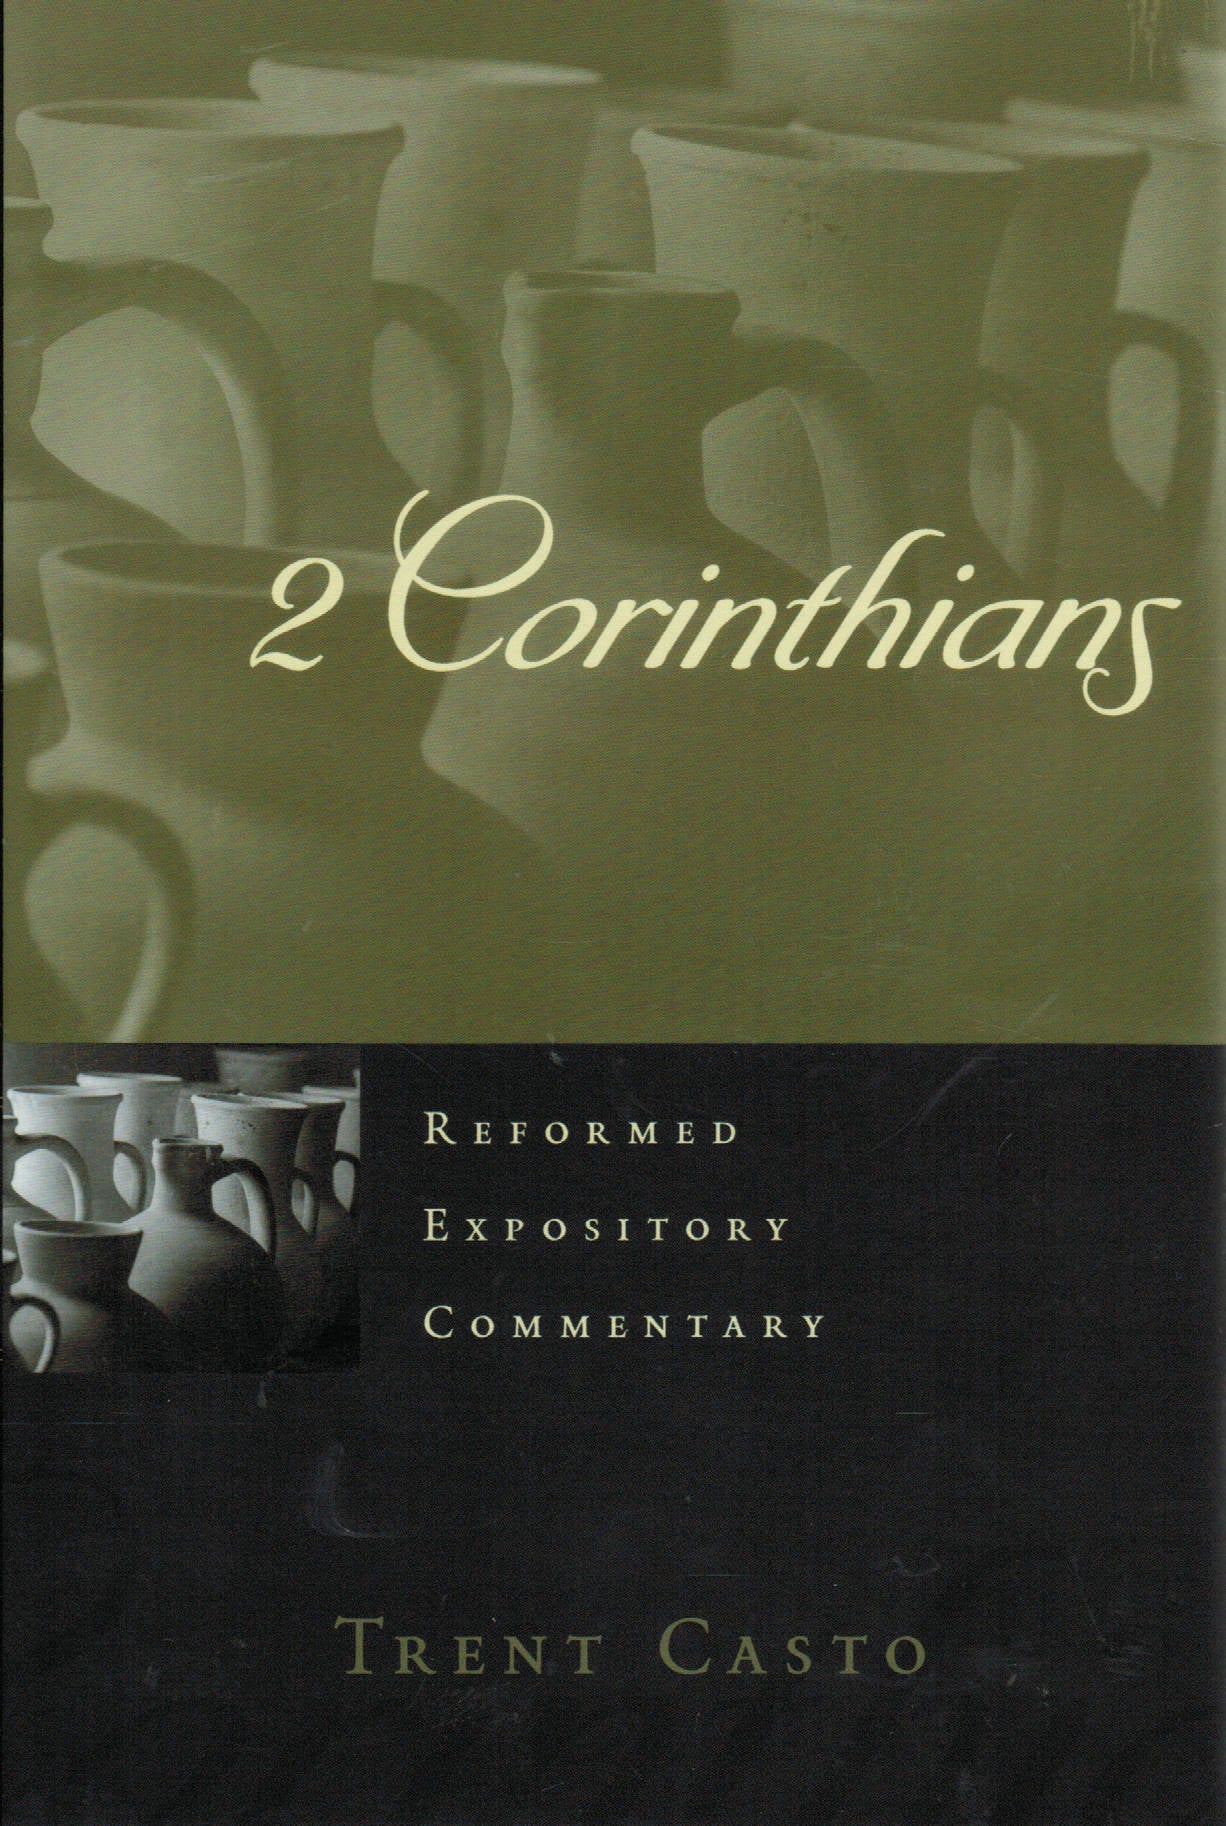 Reformed Expository Commentary - 2 Corinthians